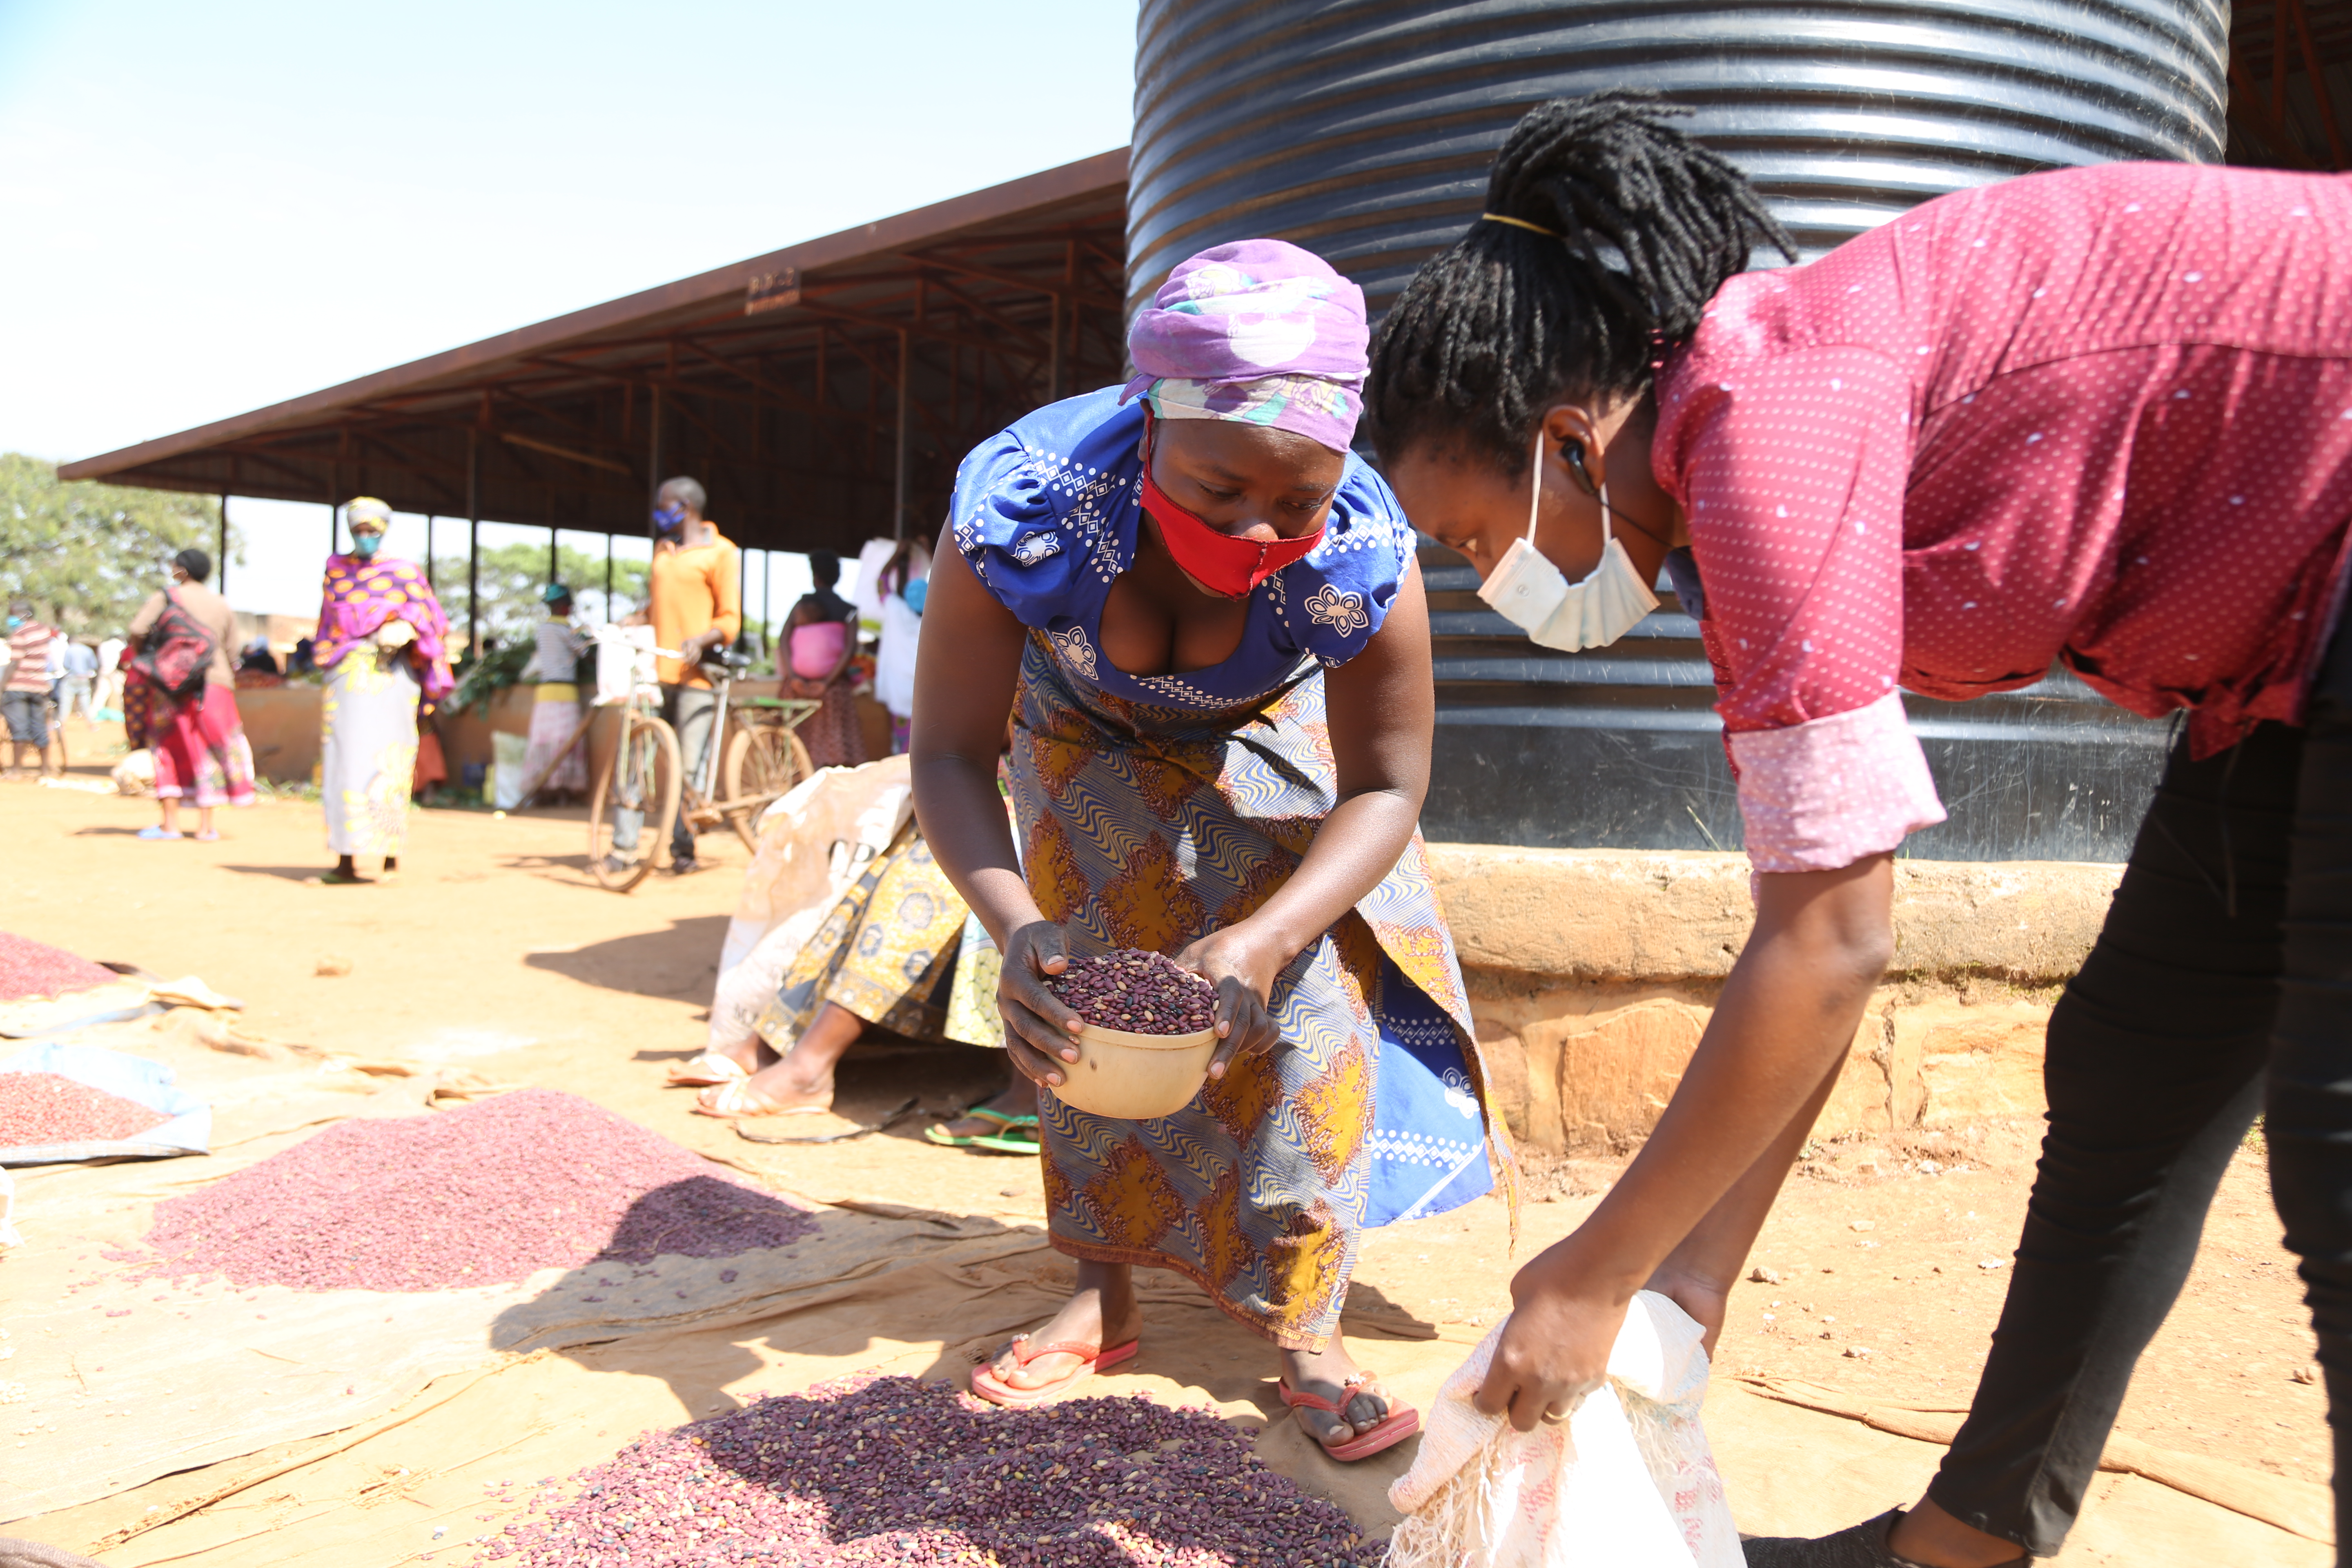 Francine (wearing a head wrap) sorting her beans for selling at the market